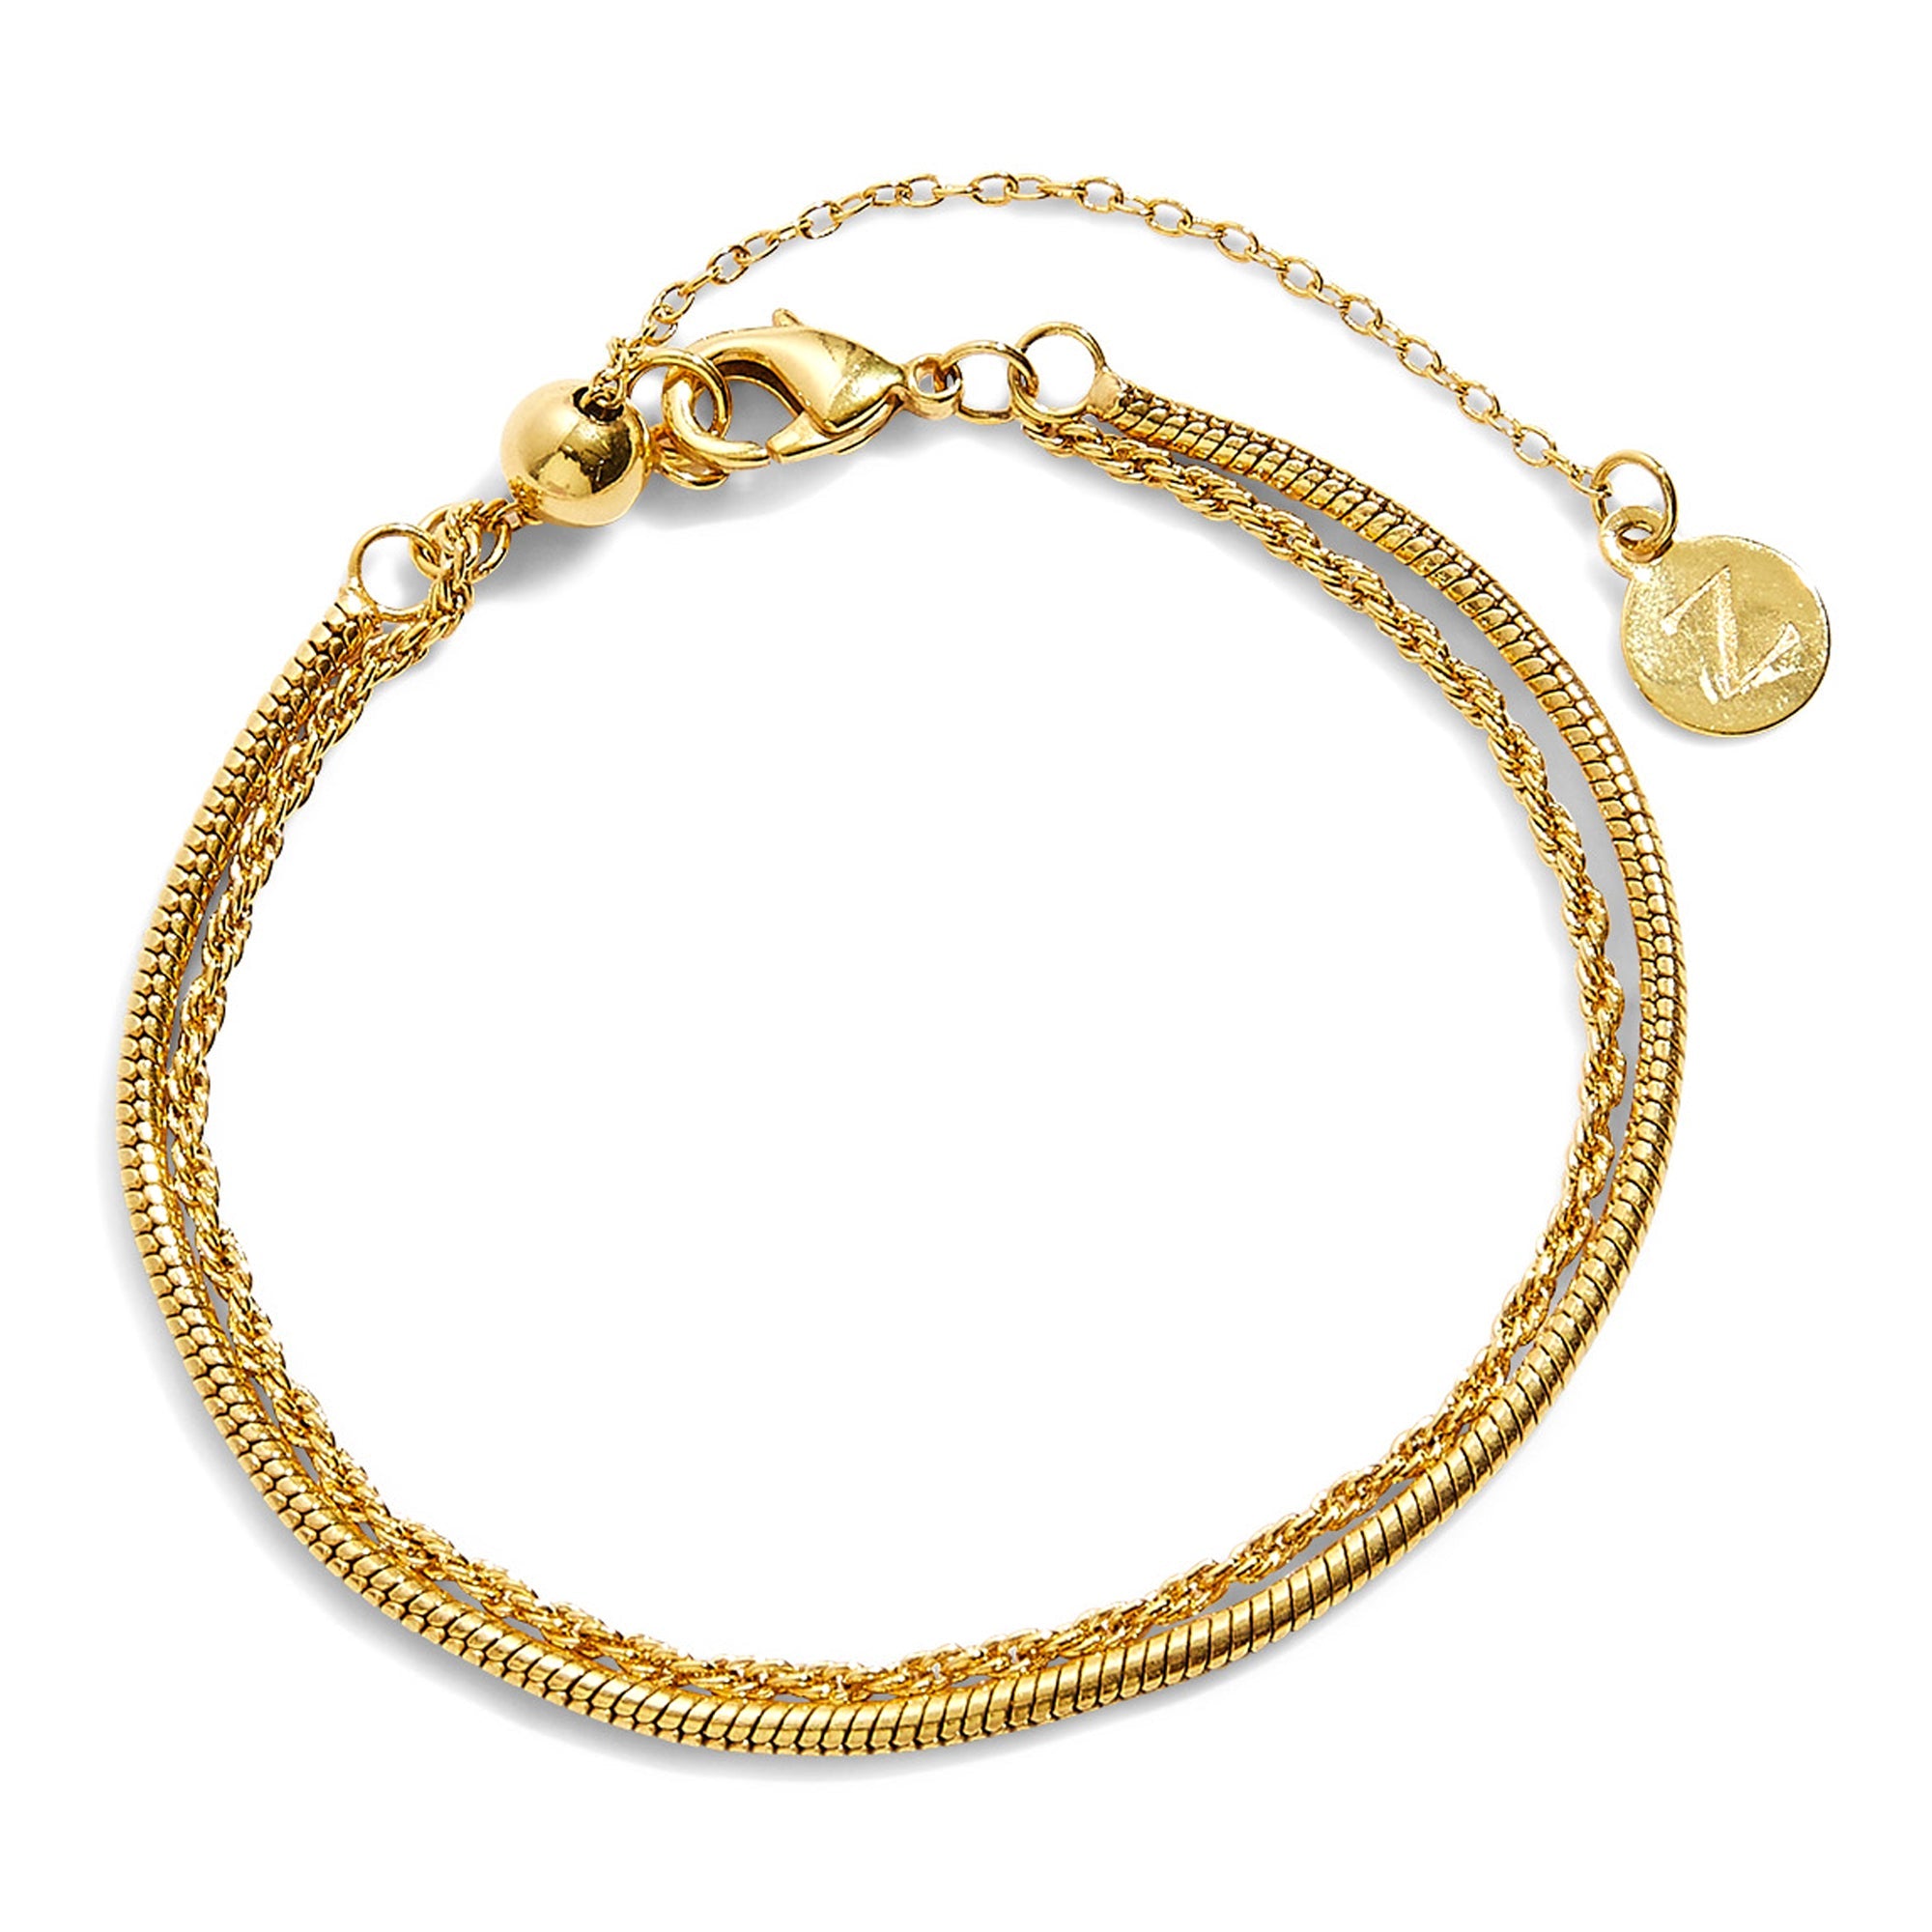 Real Gold Plated Z Omega And Rope Chain Slider Bracelet For Women By Accessorize London